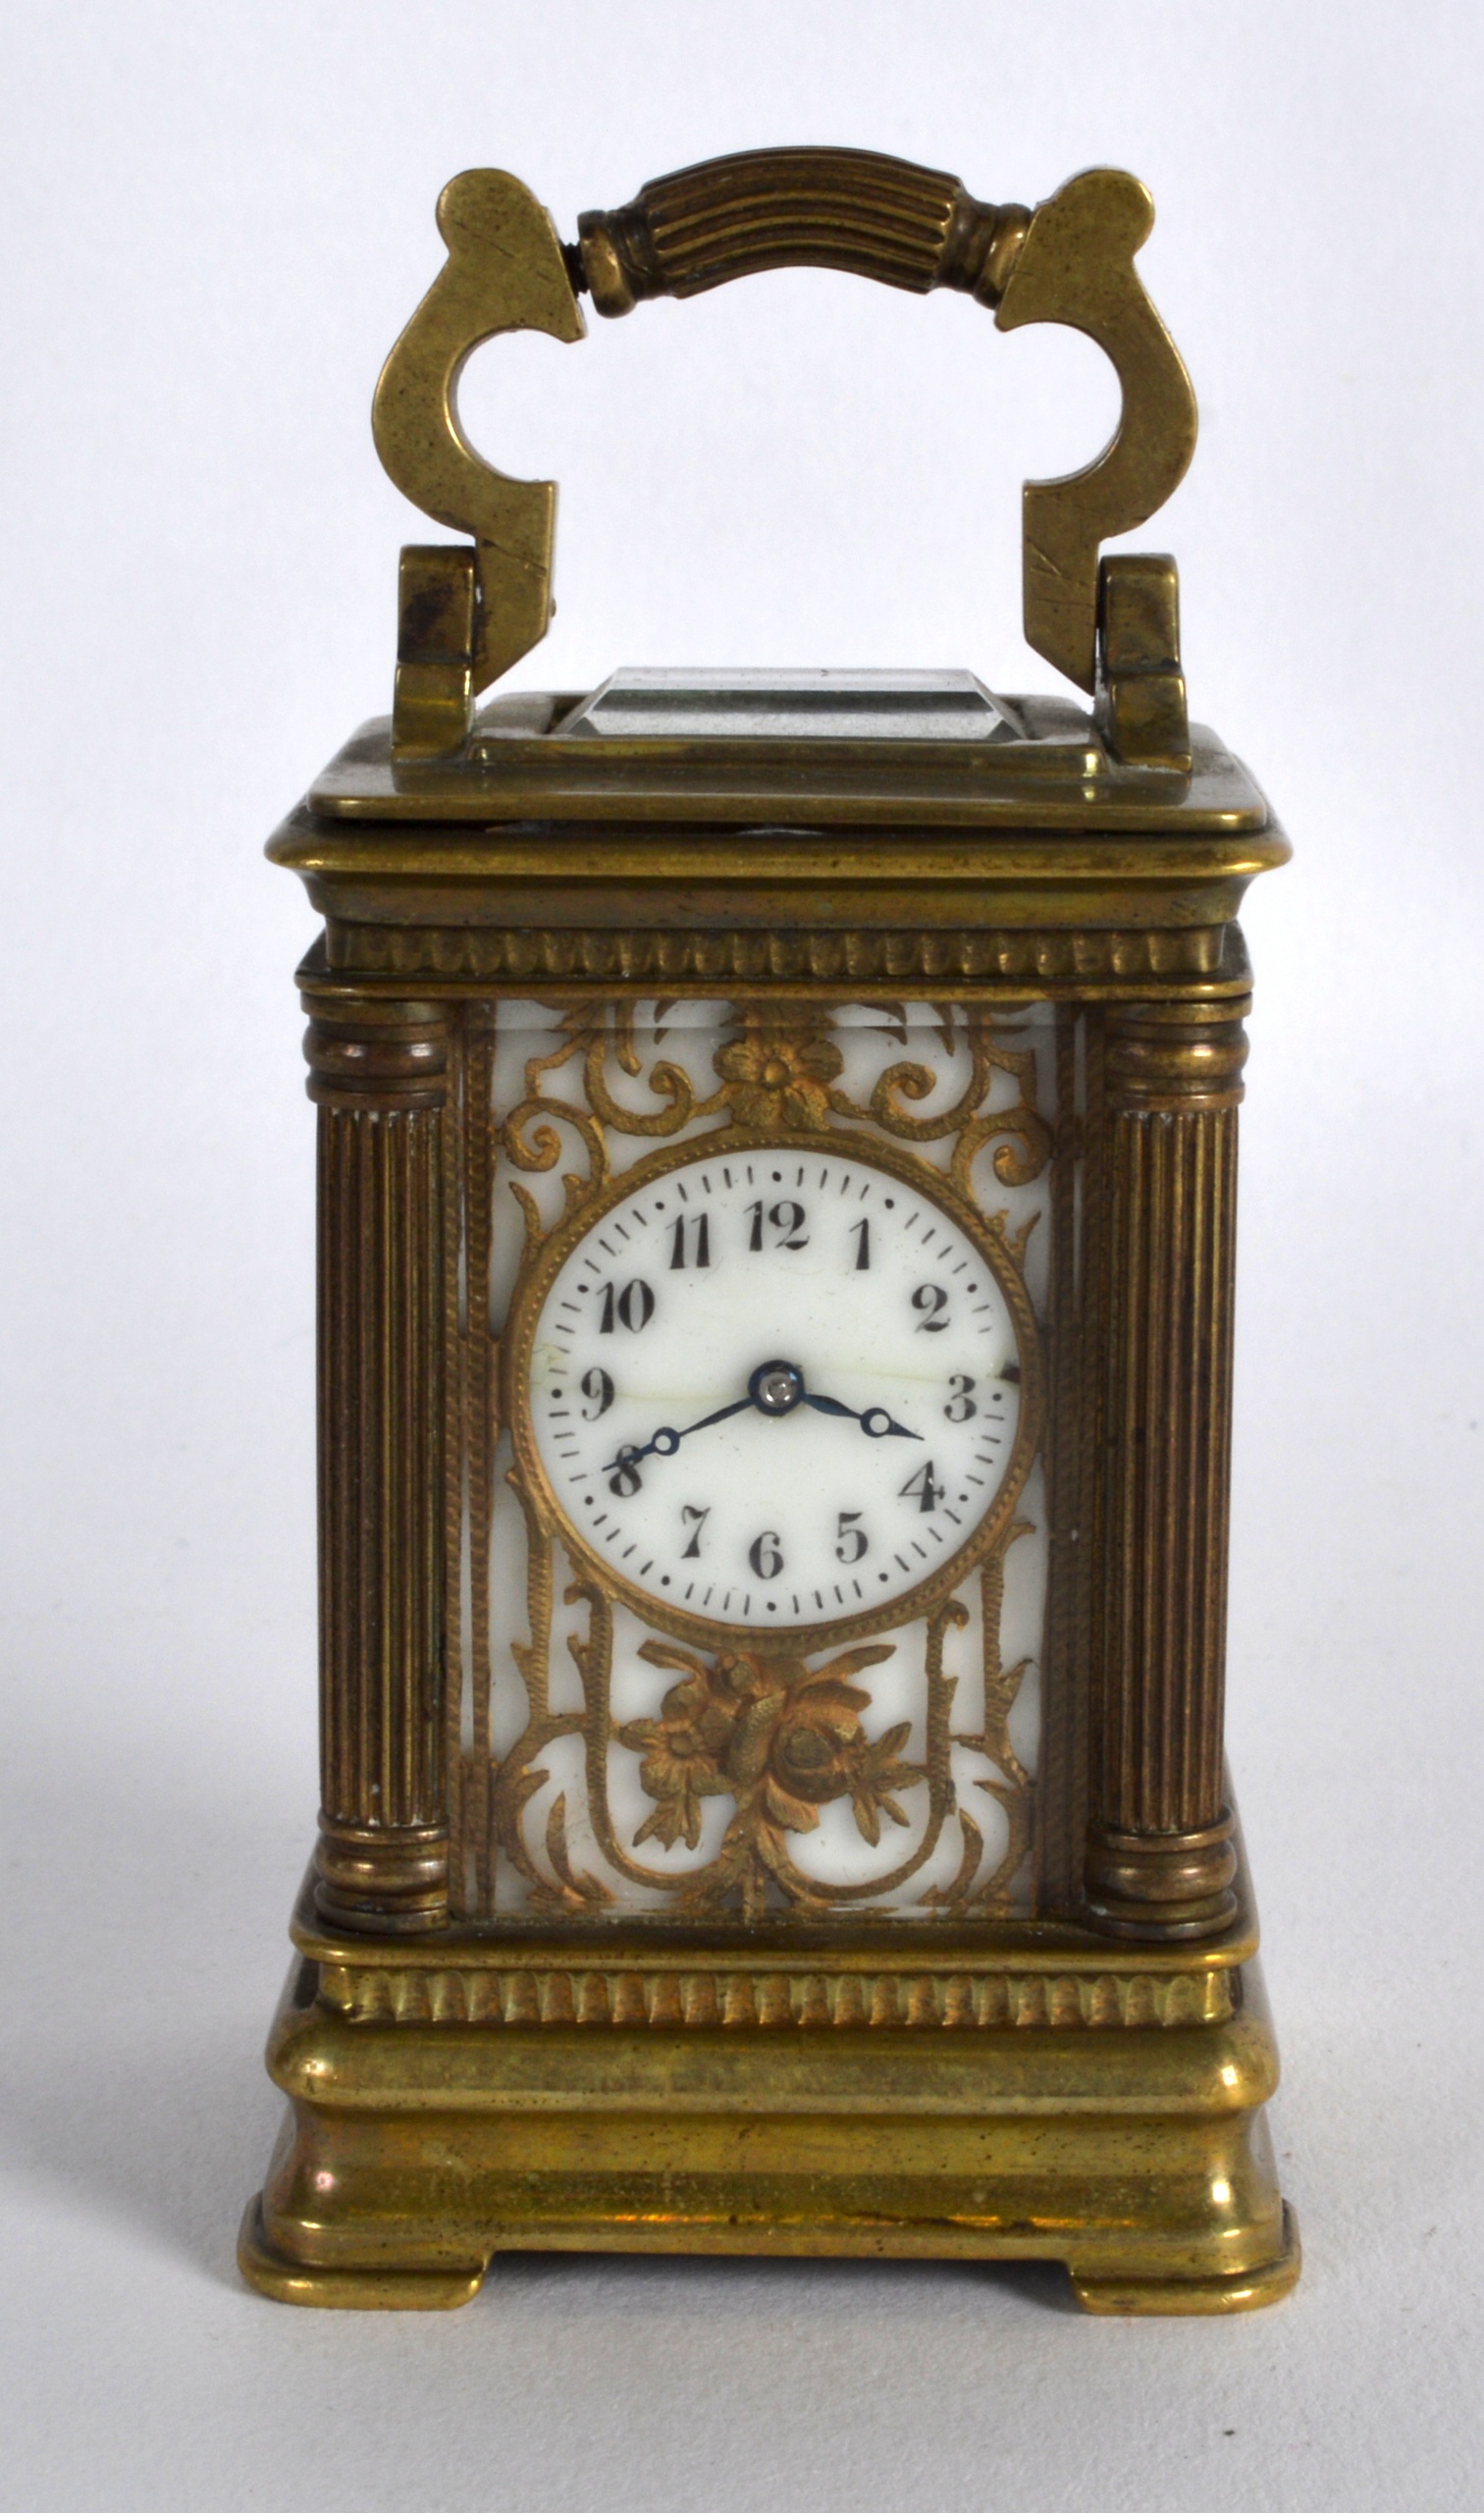 AN EARLY 20TH CENTURY FRENCH MINIATURE CARRIAGE CLOCK with white enamel dial overlaid in gilt